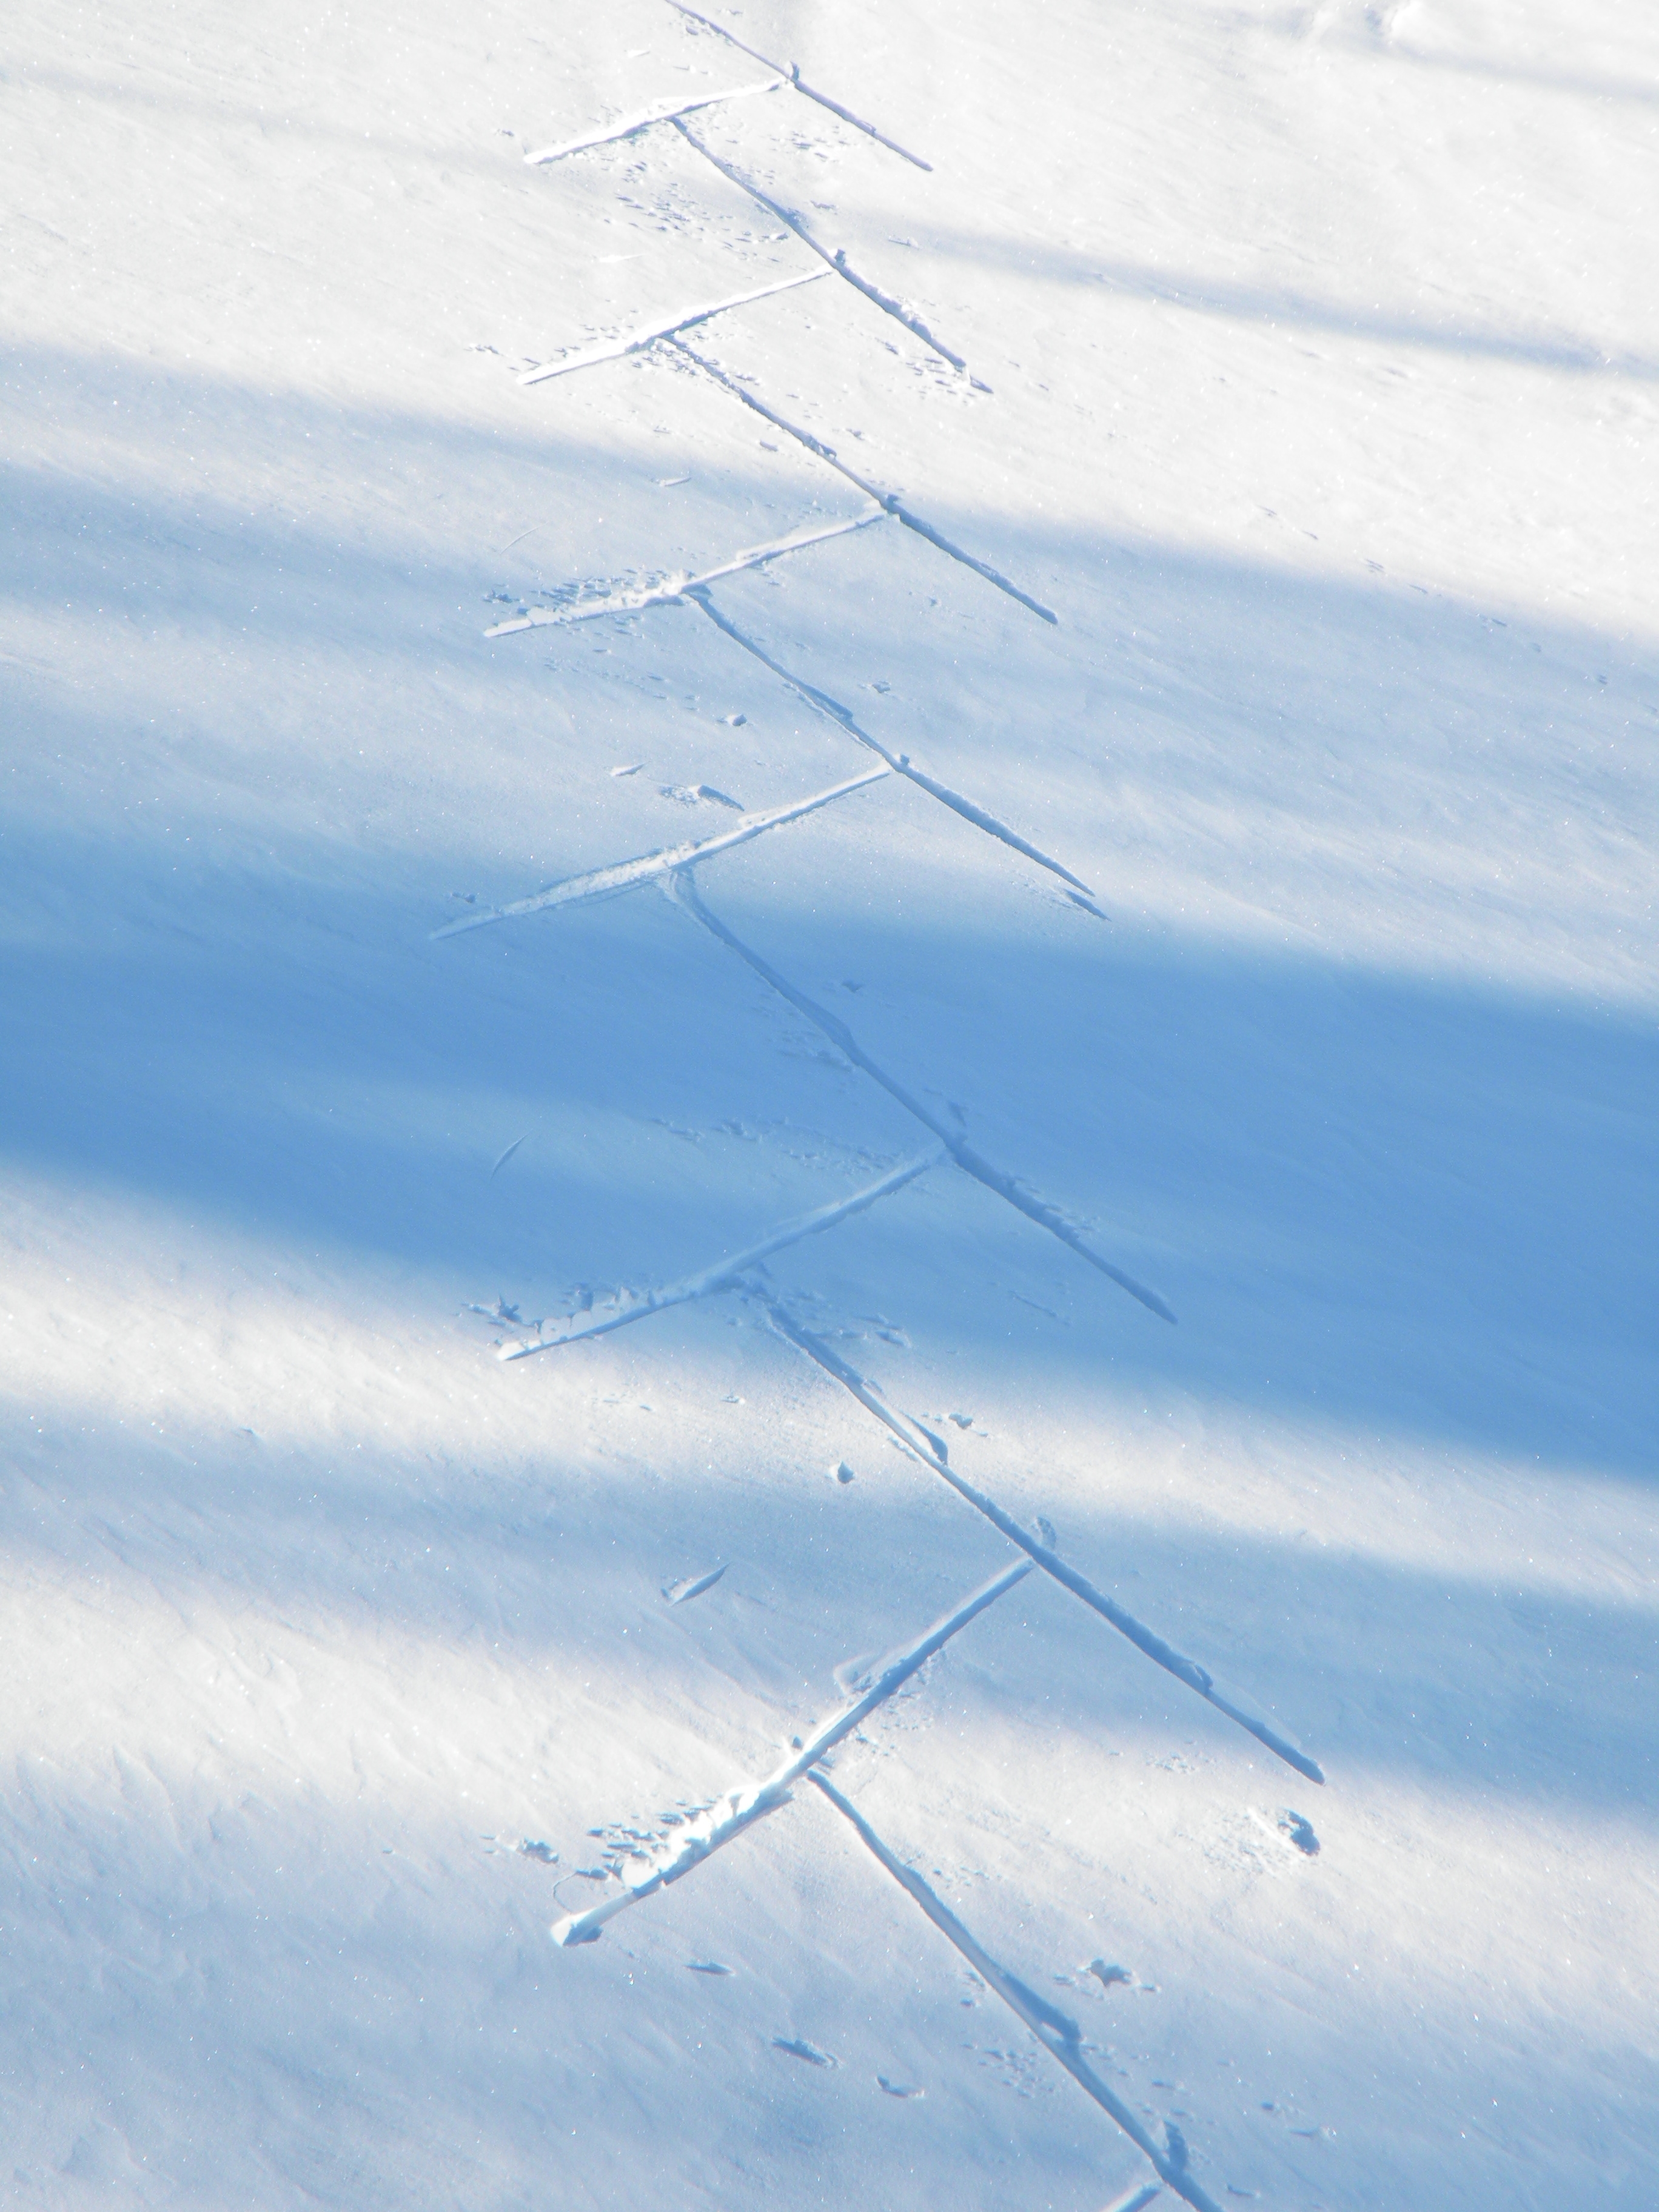 File:Skiing tracks track pattern of skating in cross country skiing ...